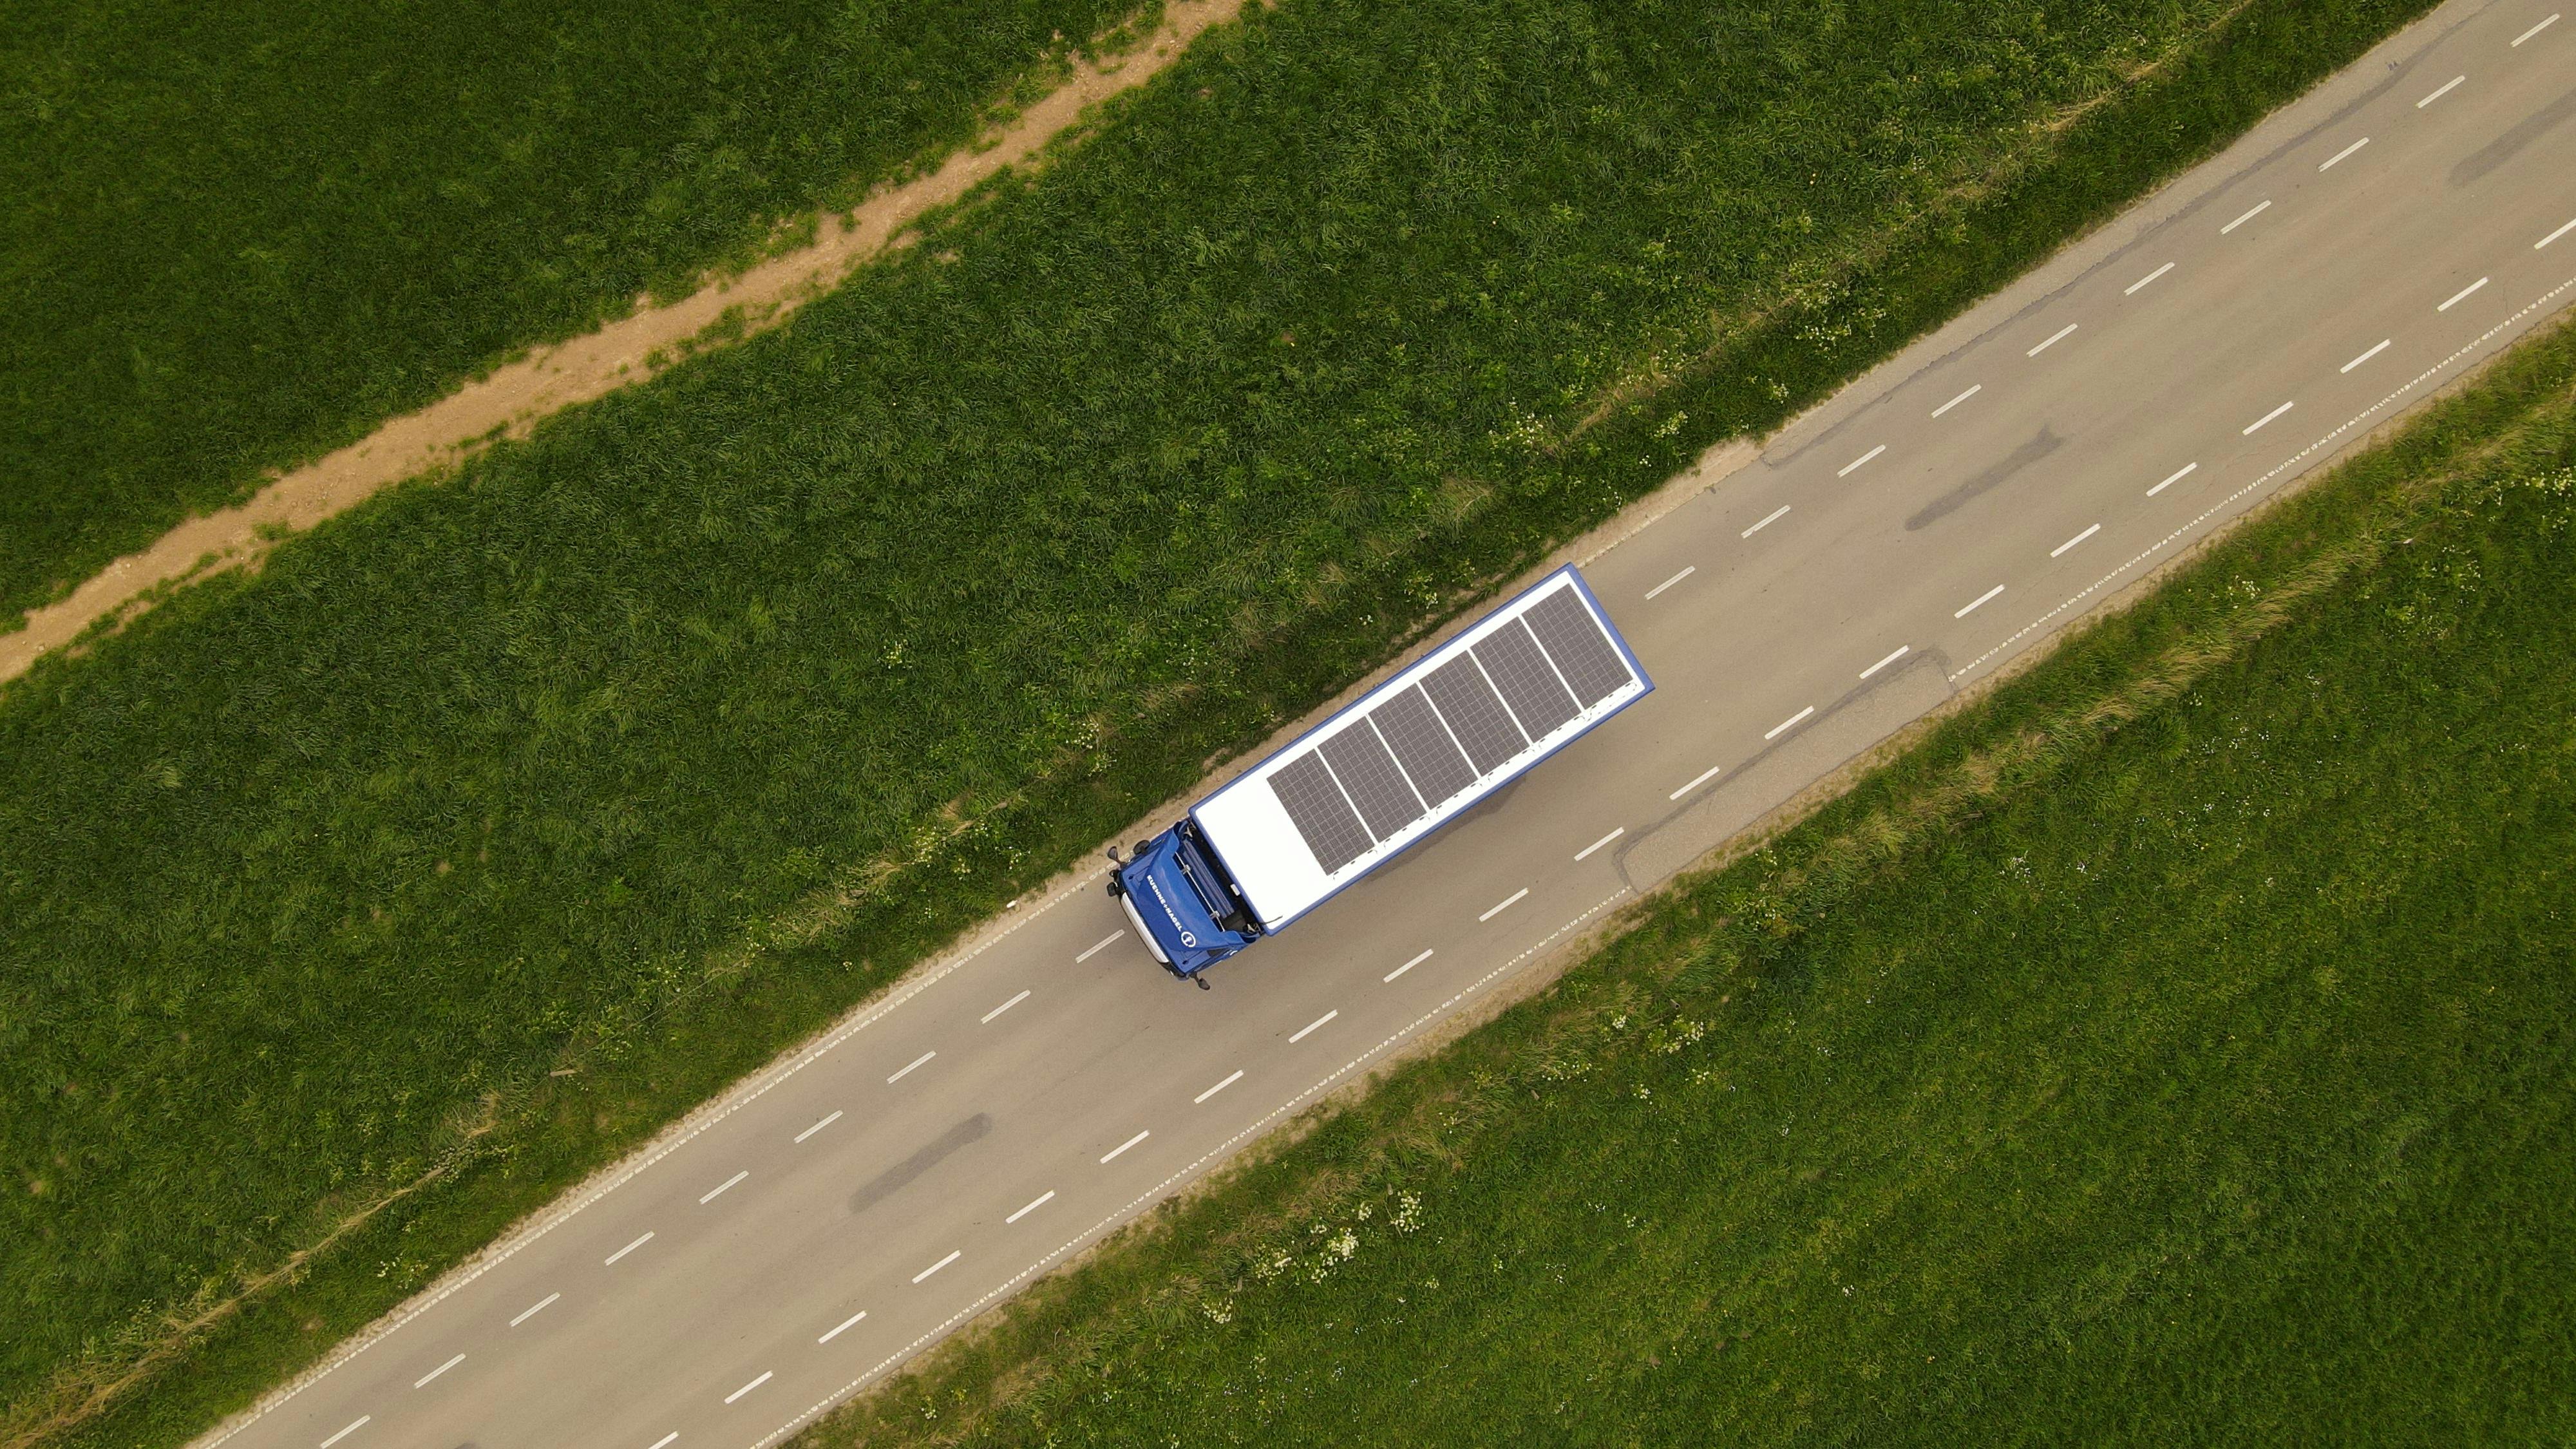 Kuehne+Nagel powers its truck with solar panels through SolarOnTop 